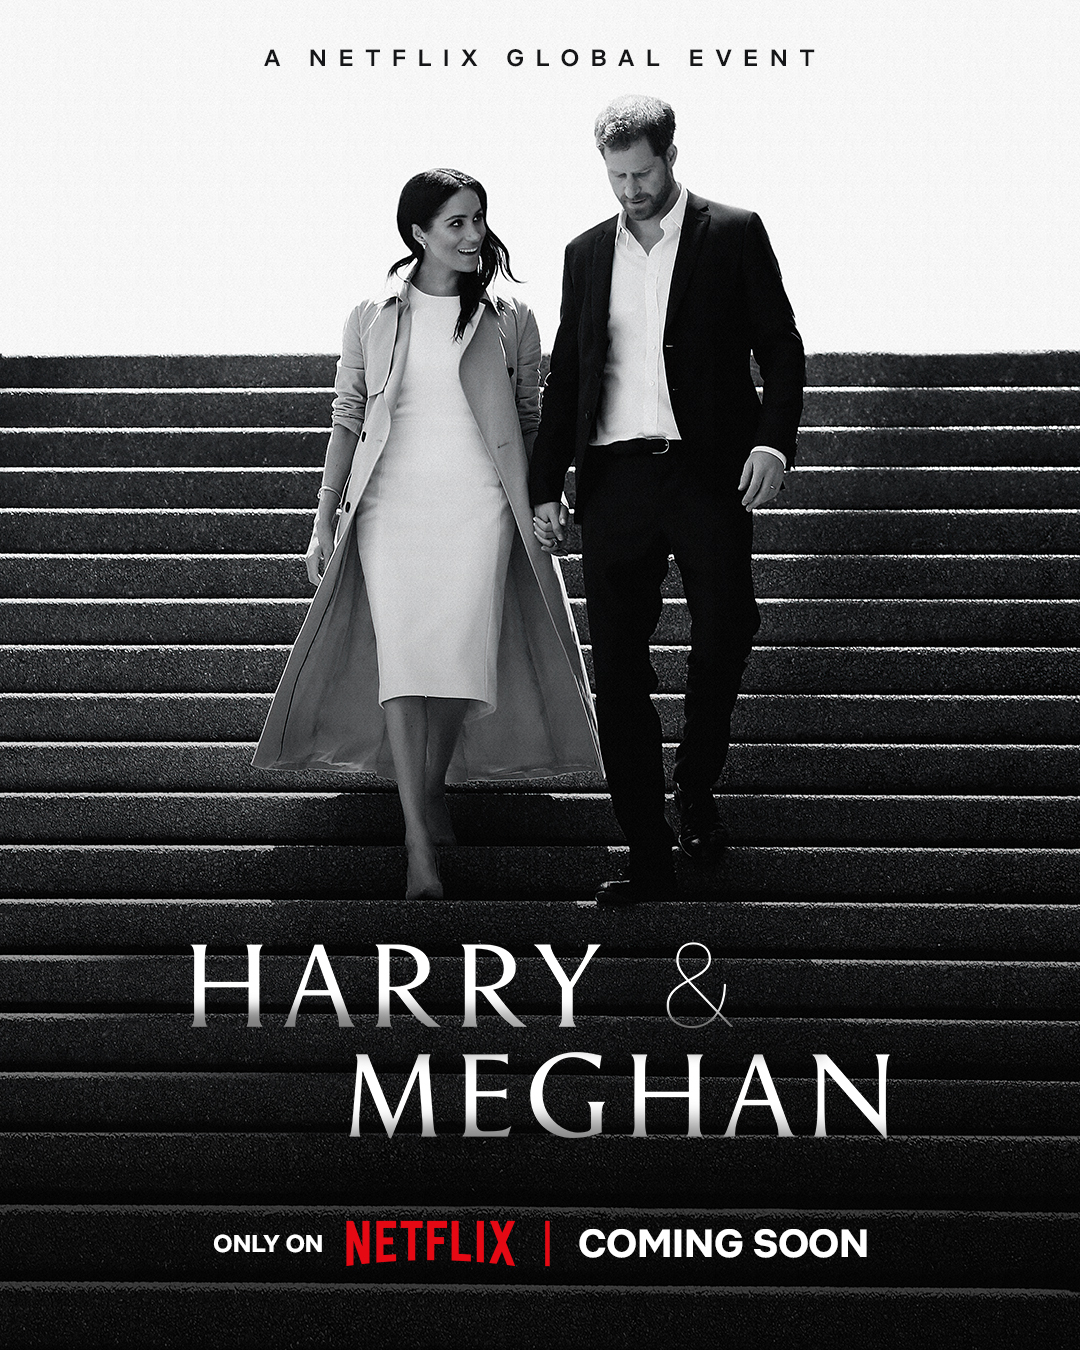 The "Harry & Meghan" series is expected to air next week